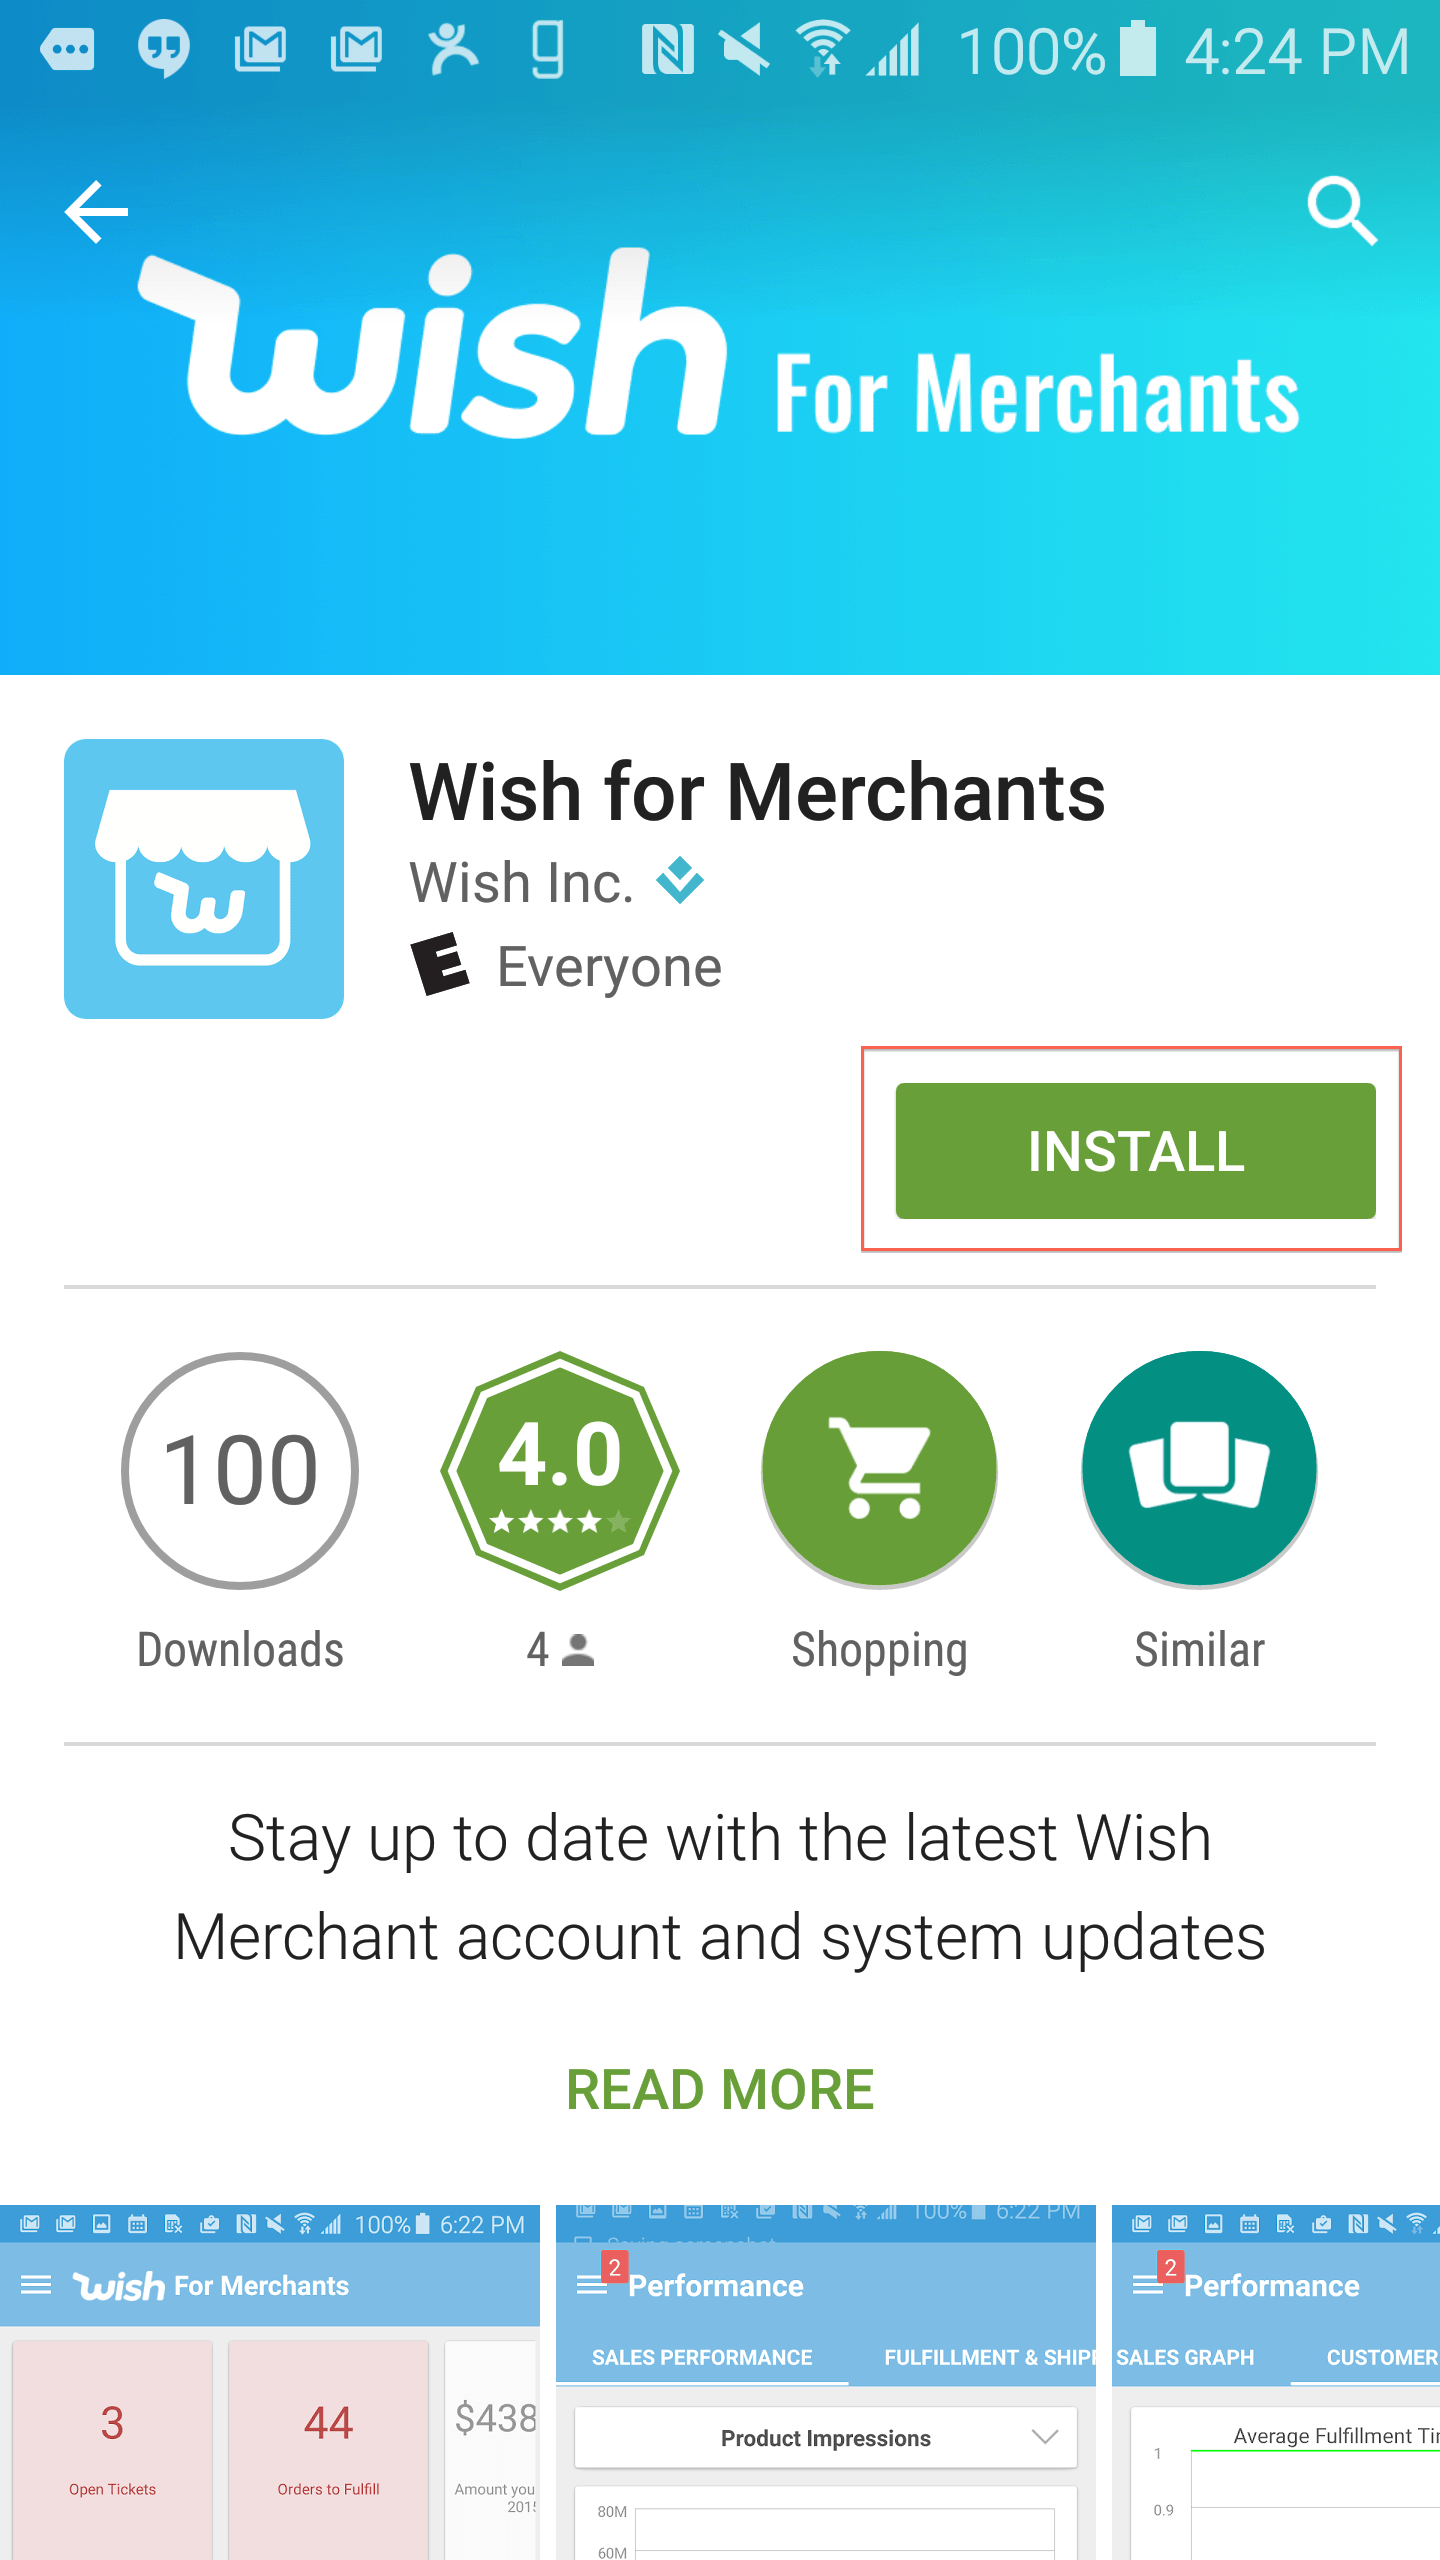 Wish App Logo - How to Download and Install the Merchant App – Wish for Merchants